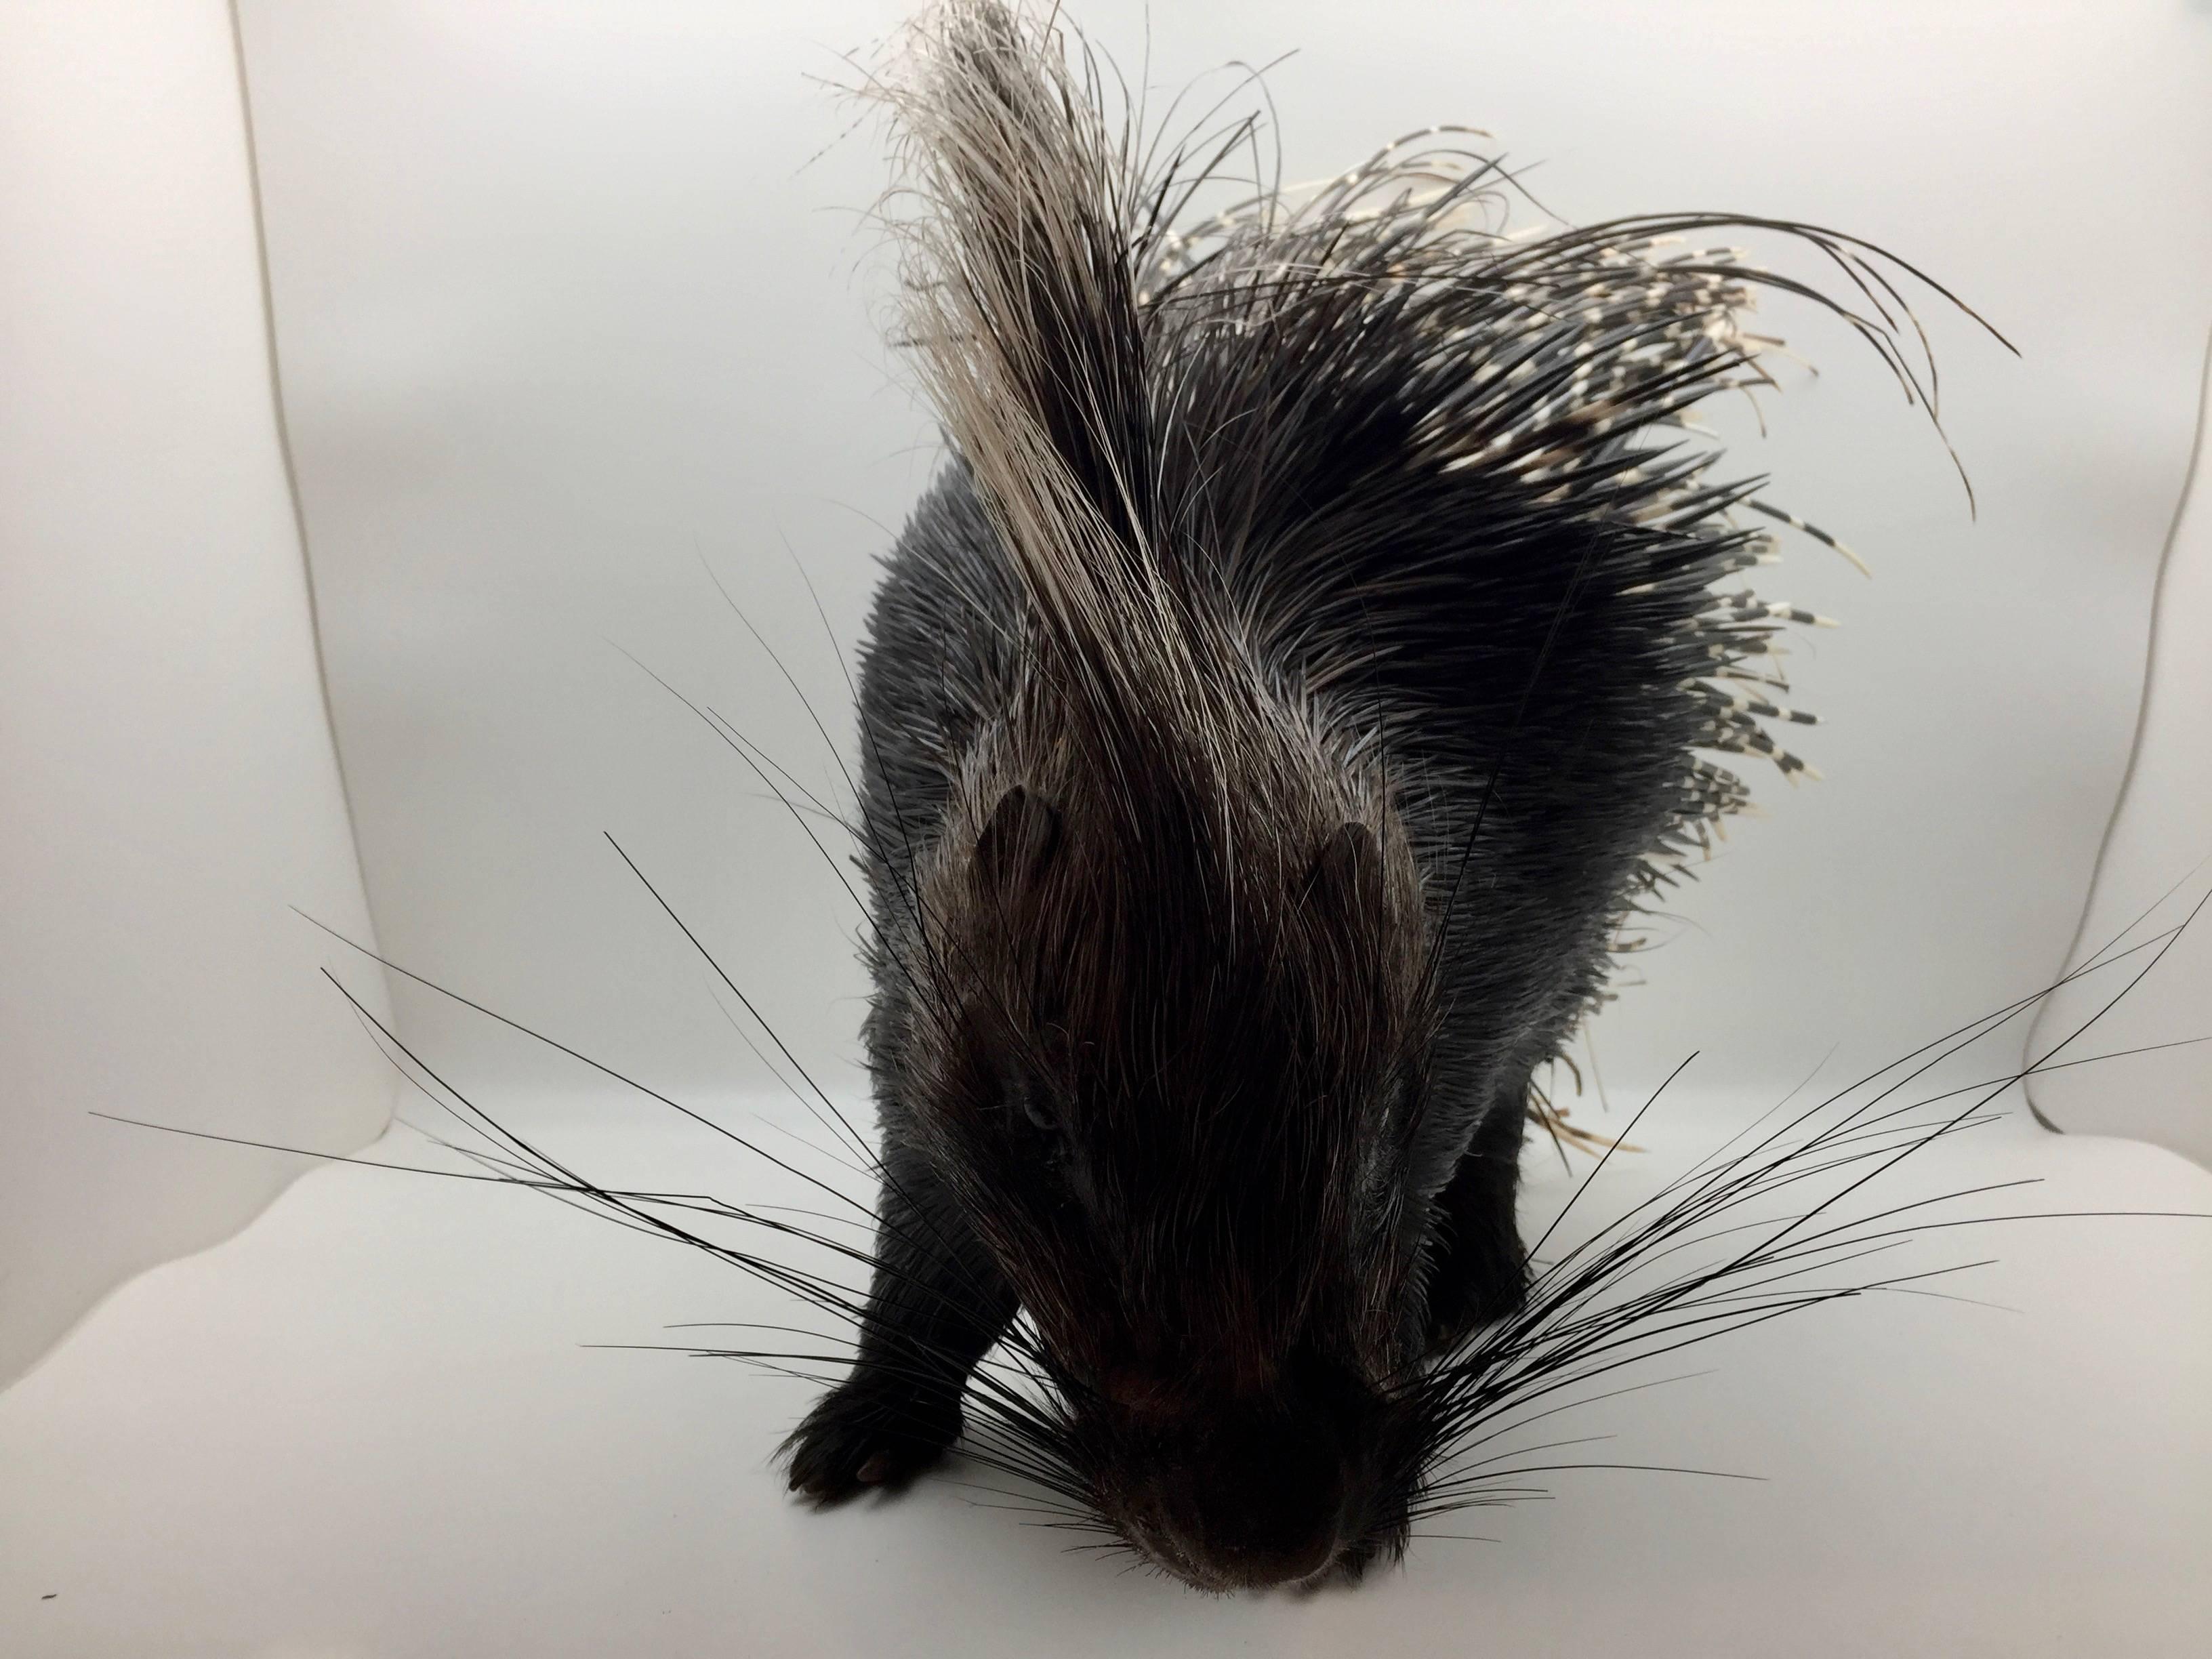 Large South African Crested Porcupine or Hystrix Cristata 2